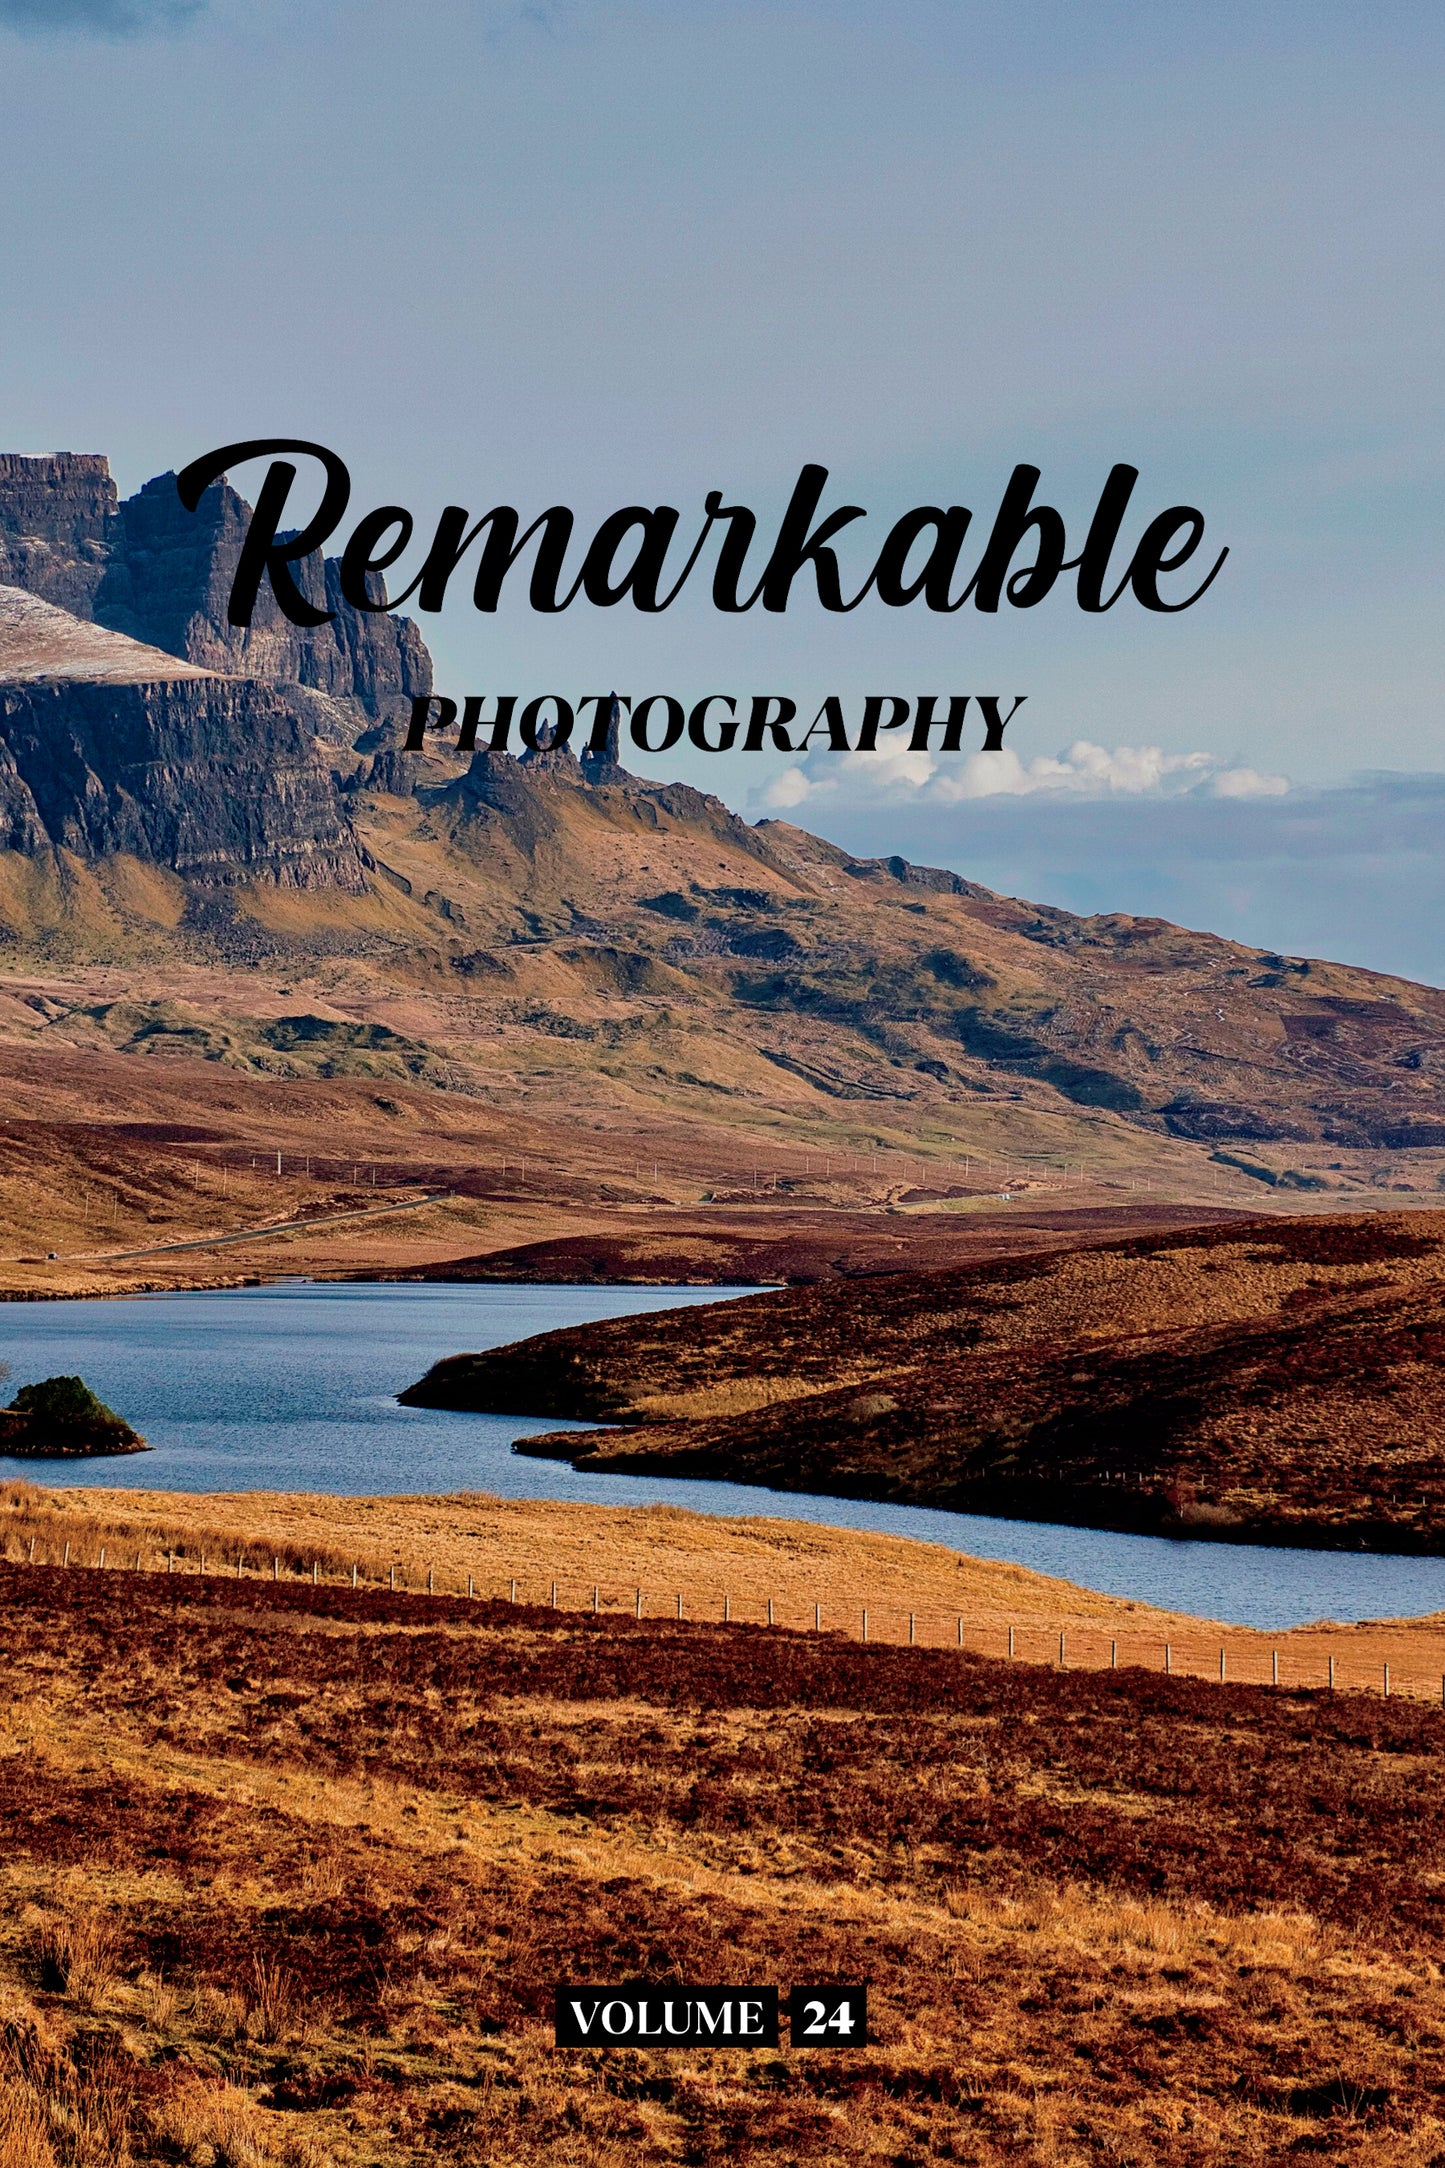 Remarkable Photography Volume 24 (Physical Book Pre-Order)